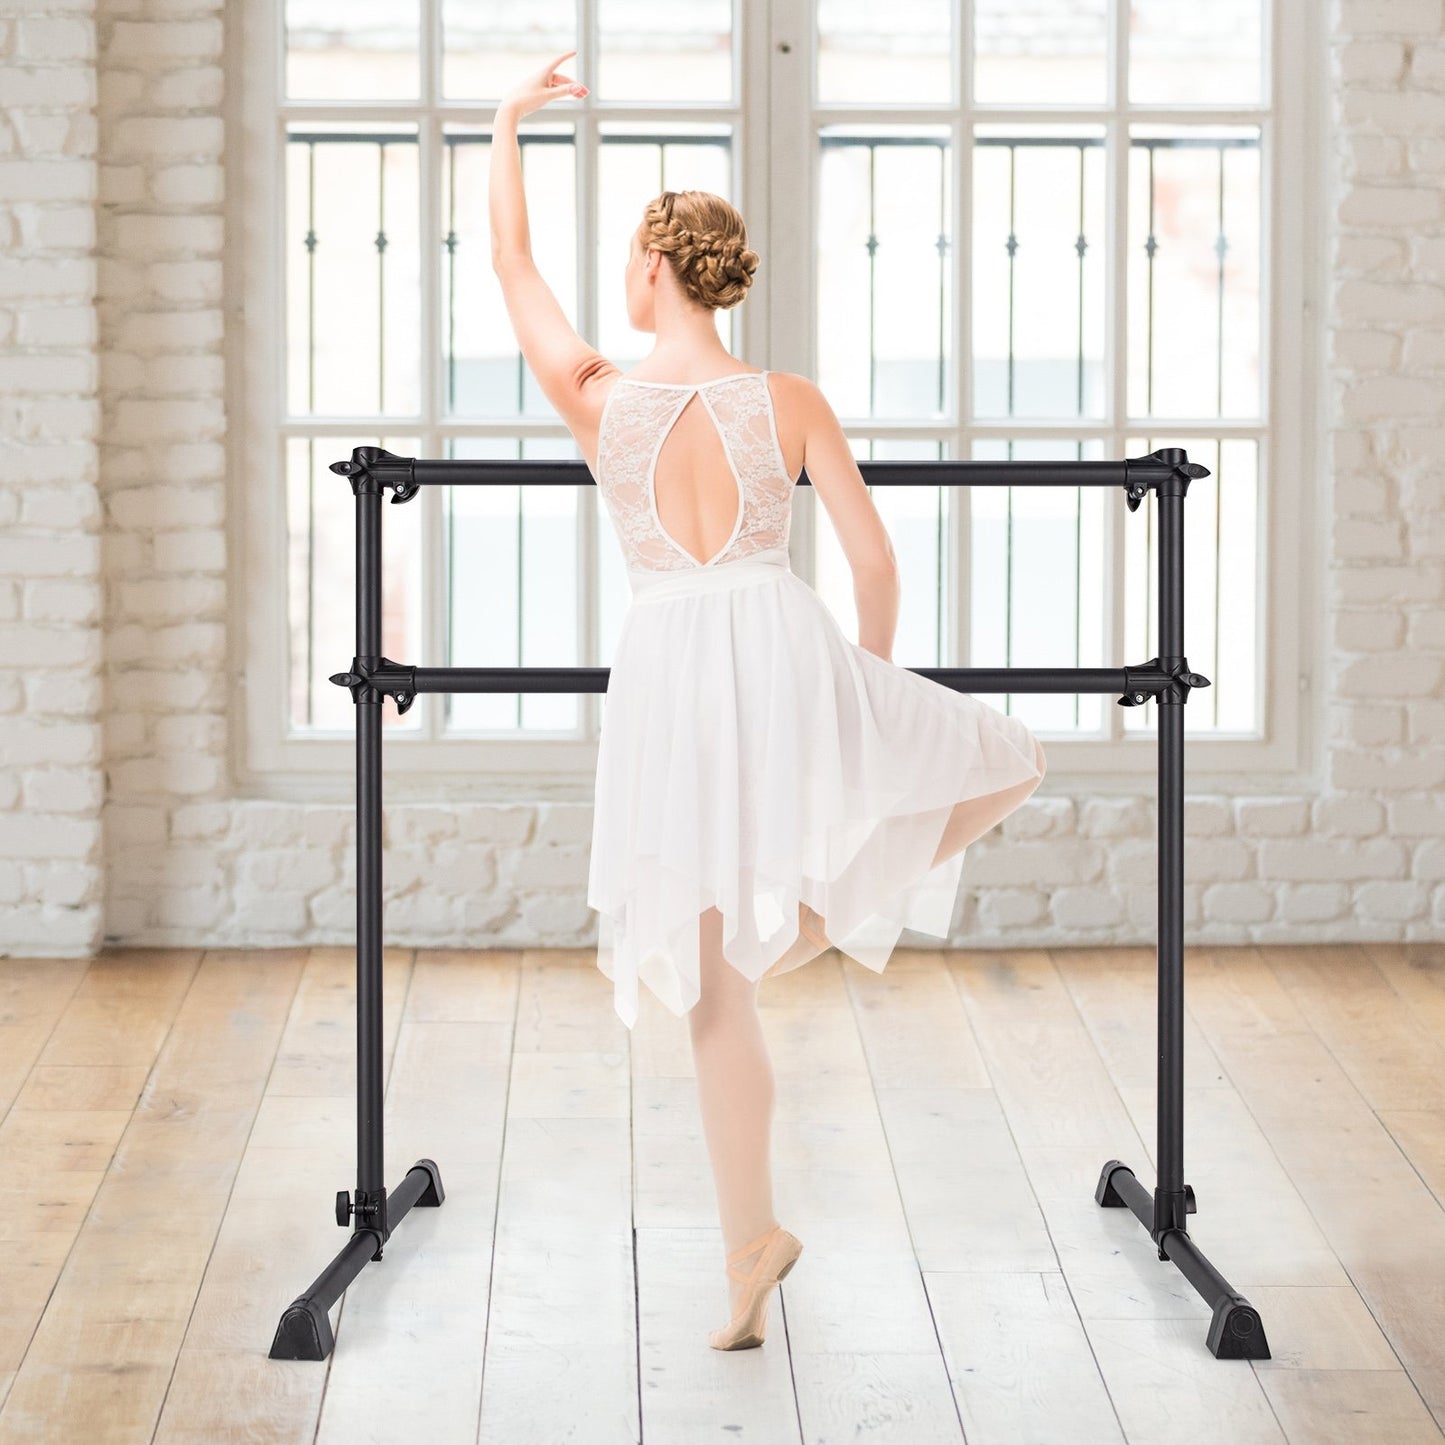 4 Feet Portable Double Freestanding Barre Dancing Stretching, Black